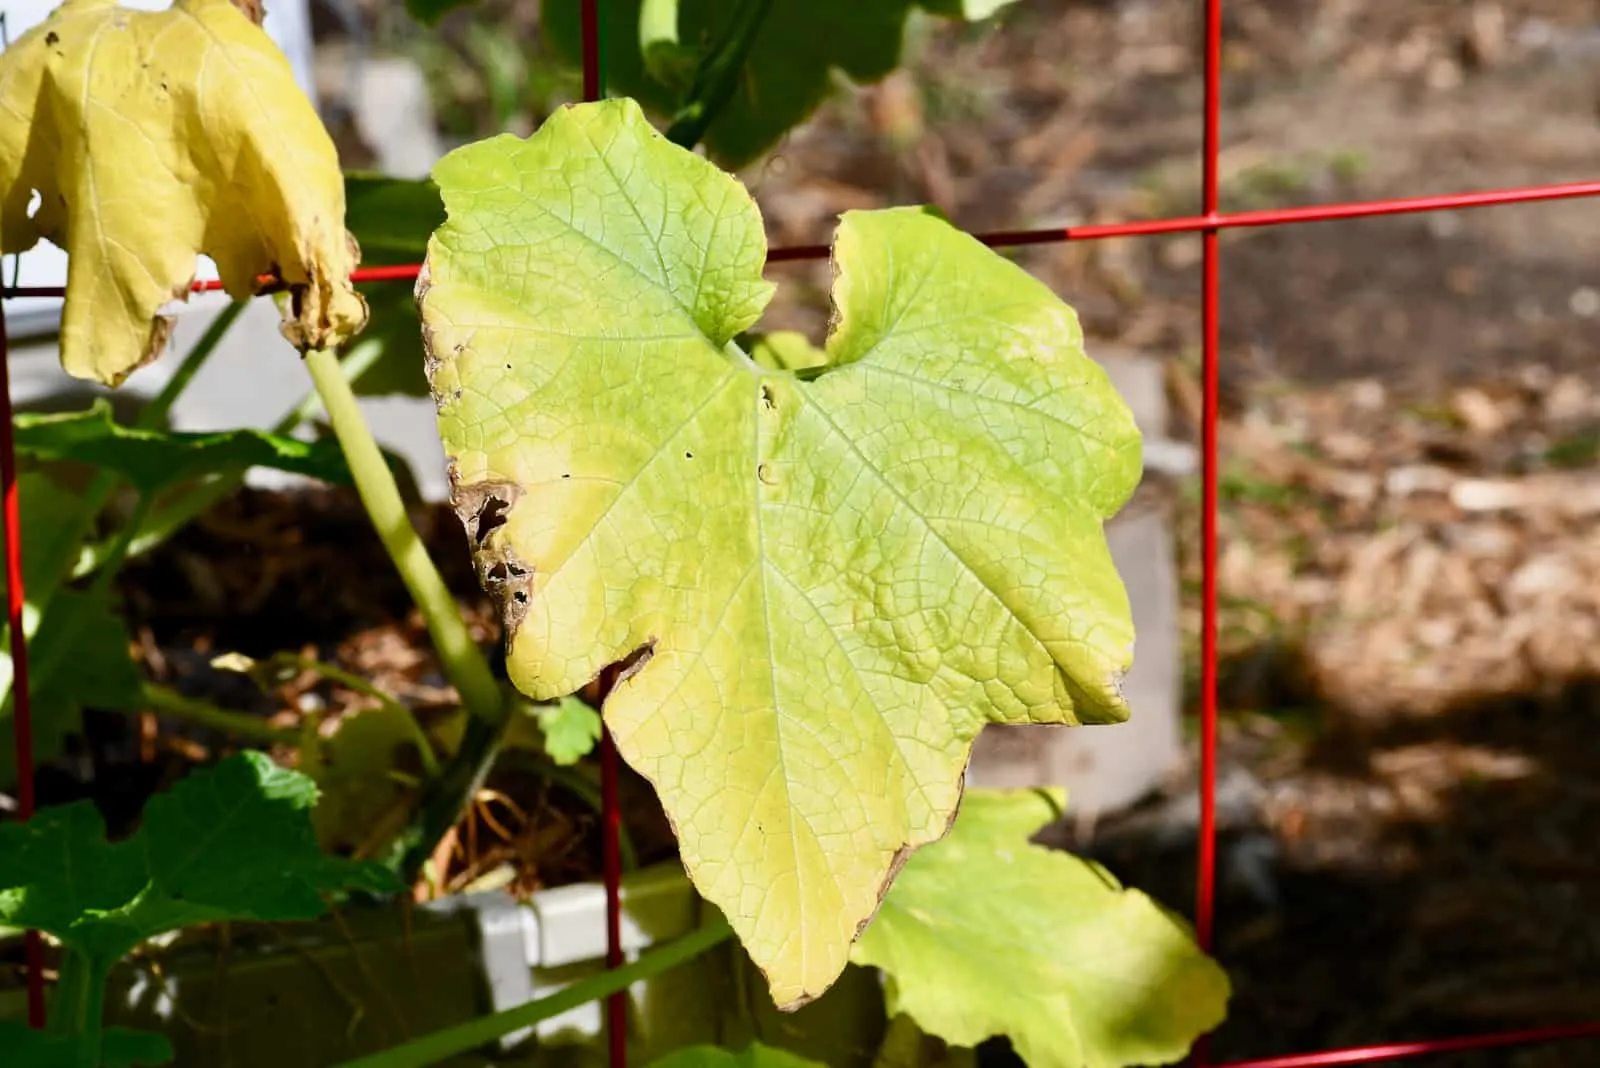 a cucumber leaf that has turned yellow